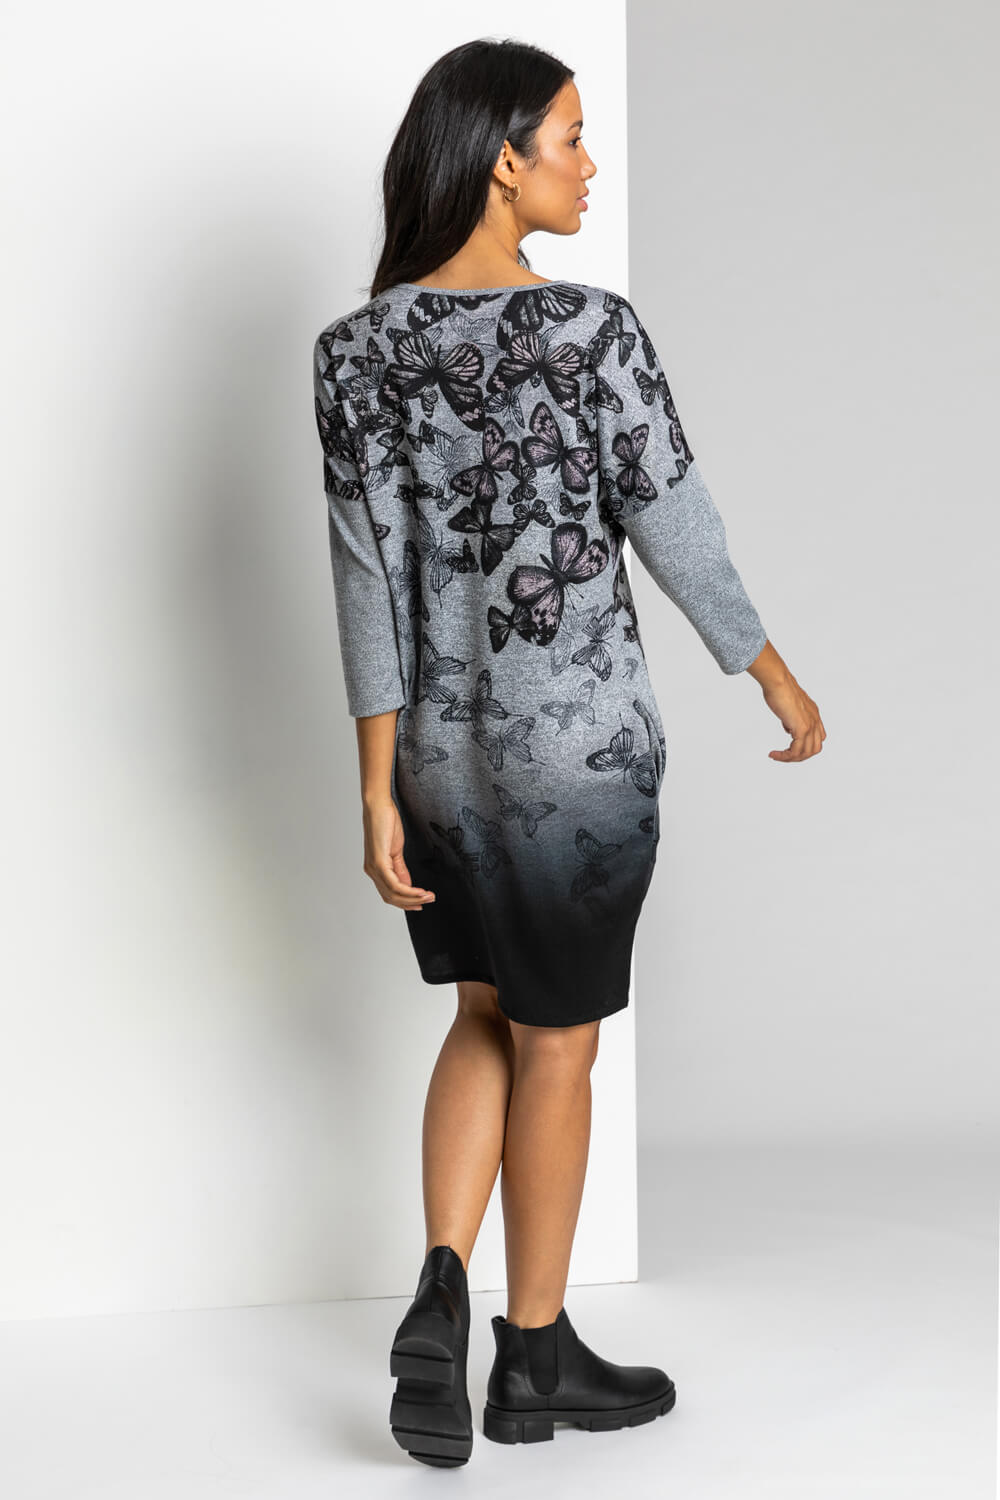 Black Butterfly Print Embellished Slouch Dress, Image 2 of 4